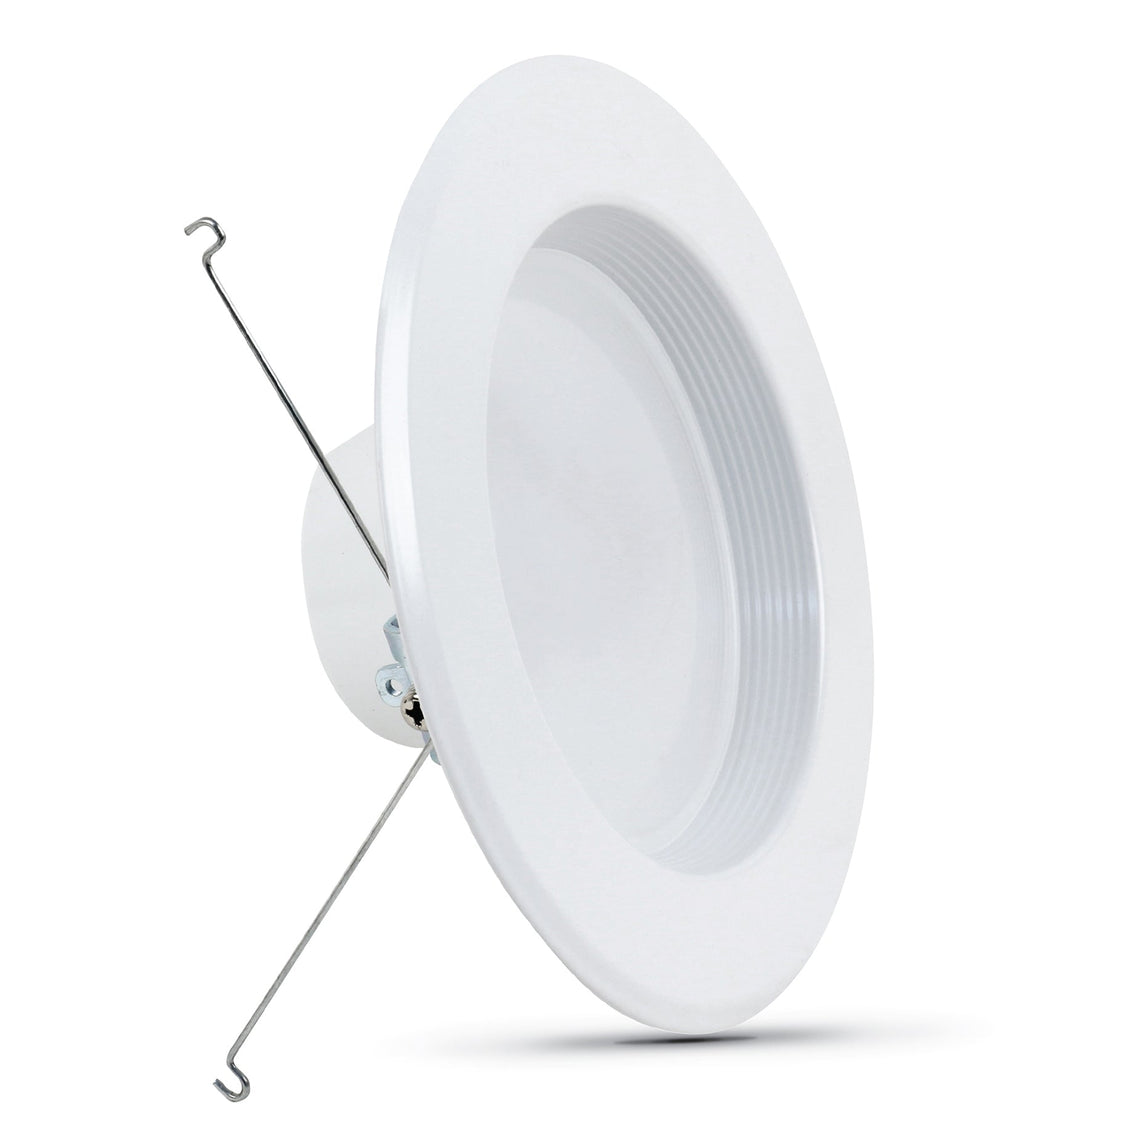 5/6 Inch Recessed LED Downlights, 10.2 Watts, Standard Base Adapter, 925 lumens